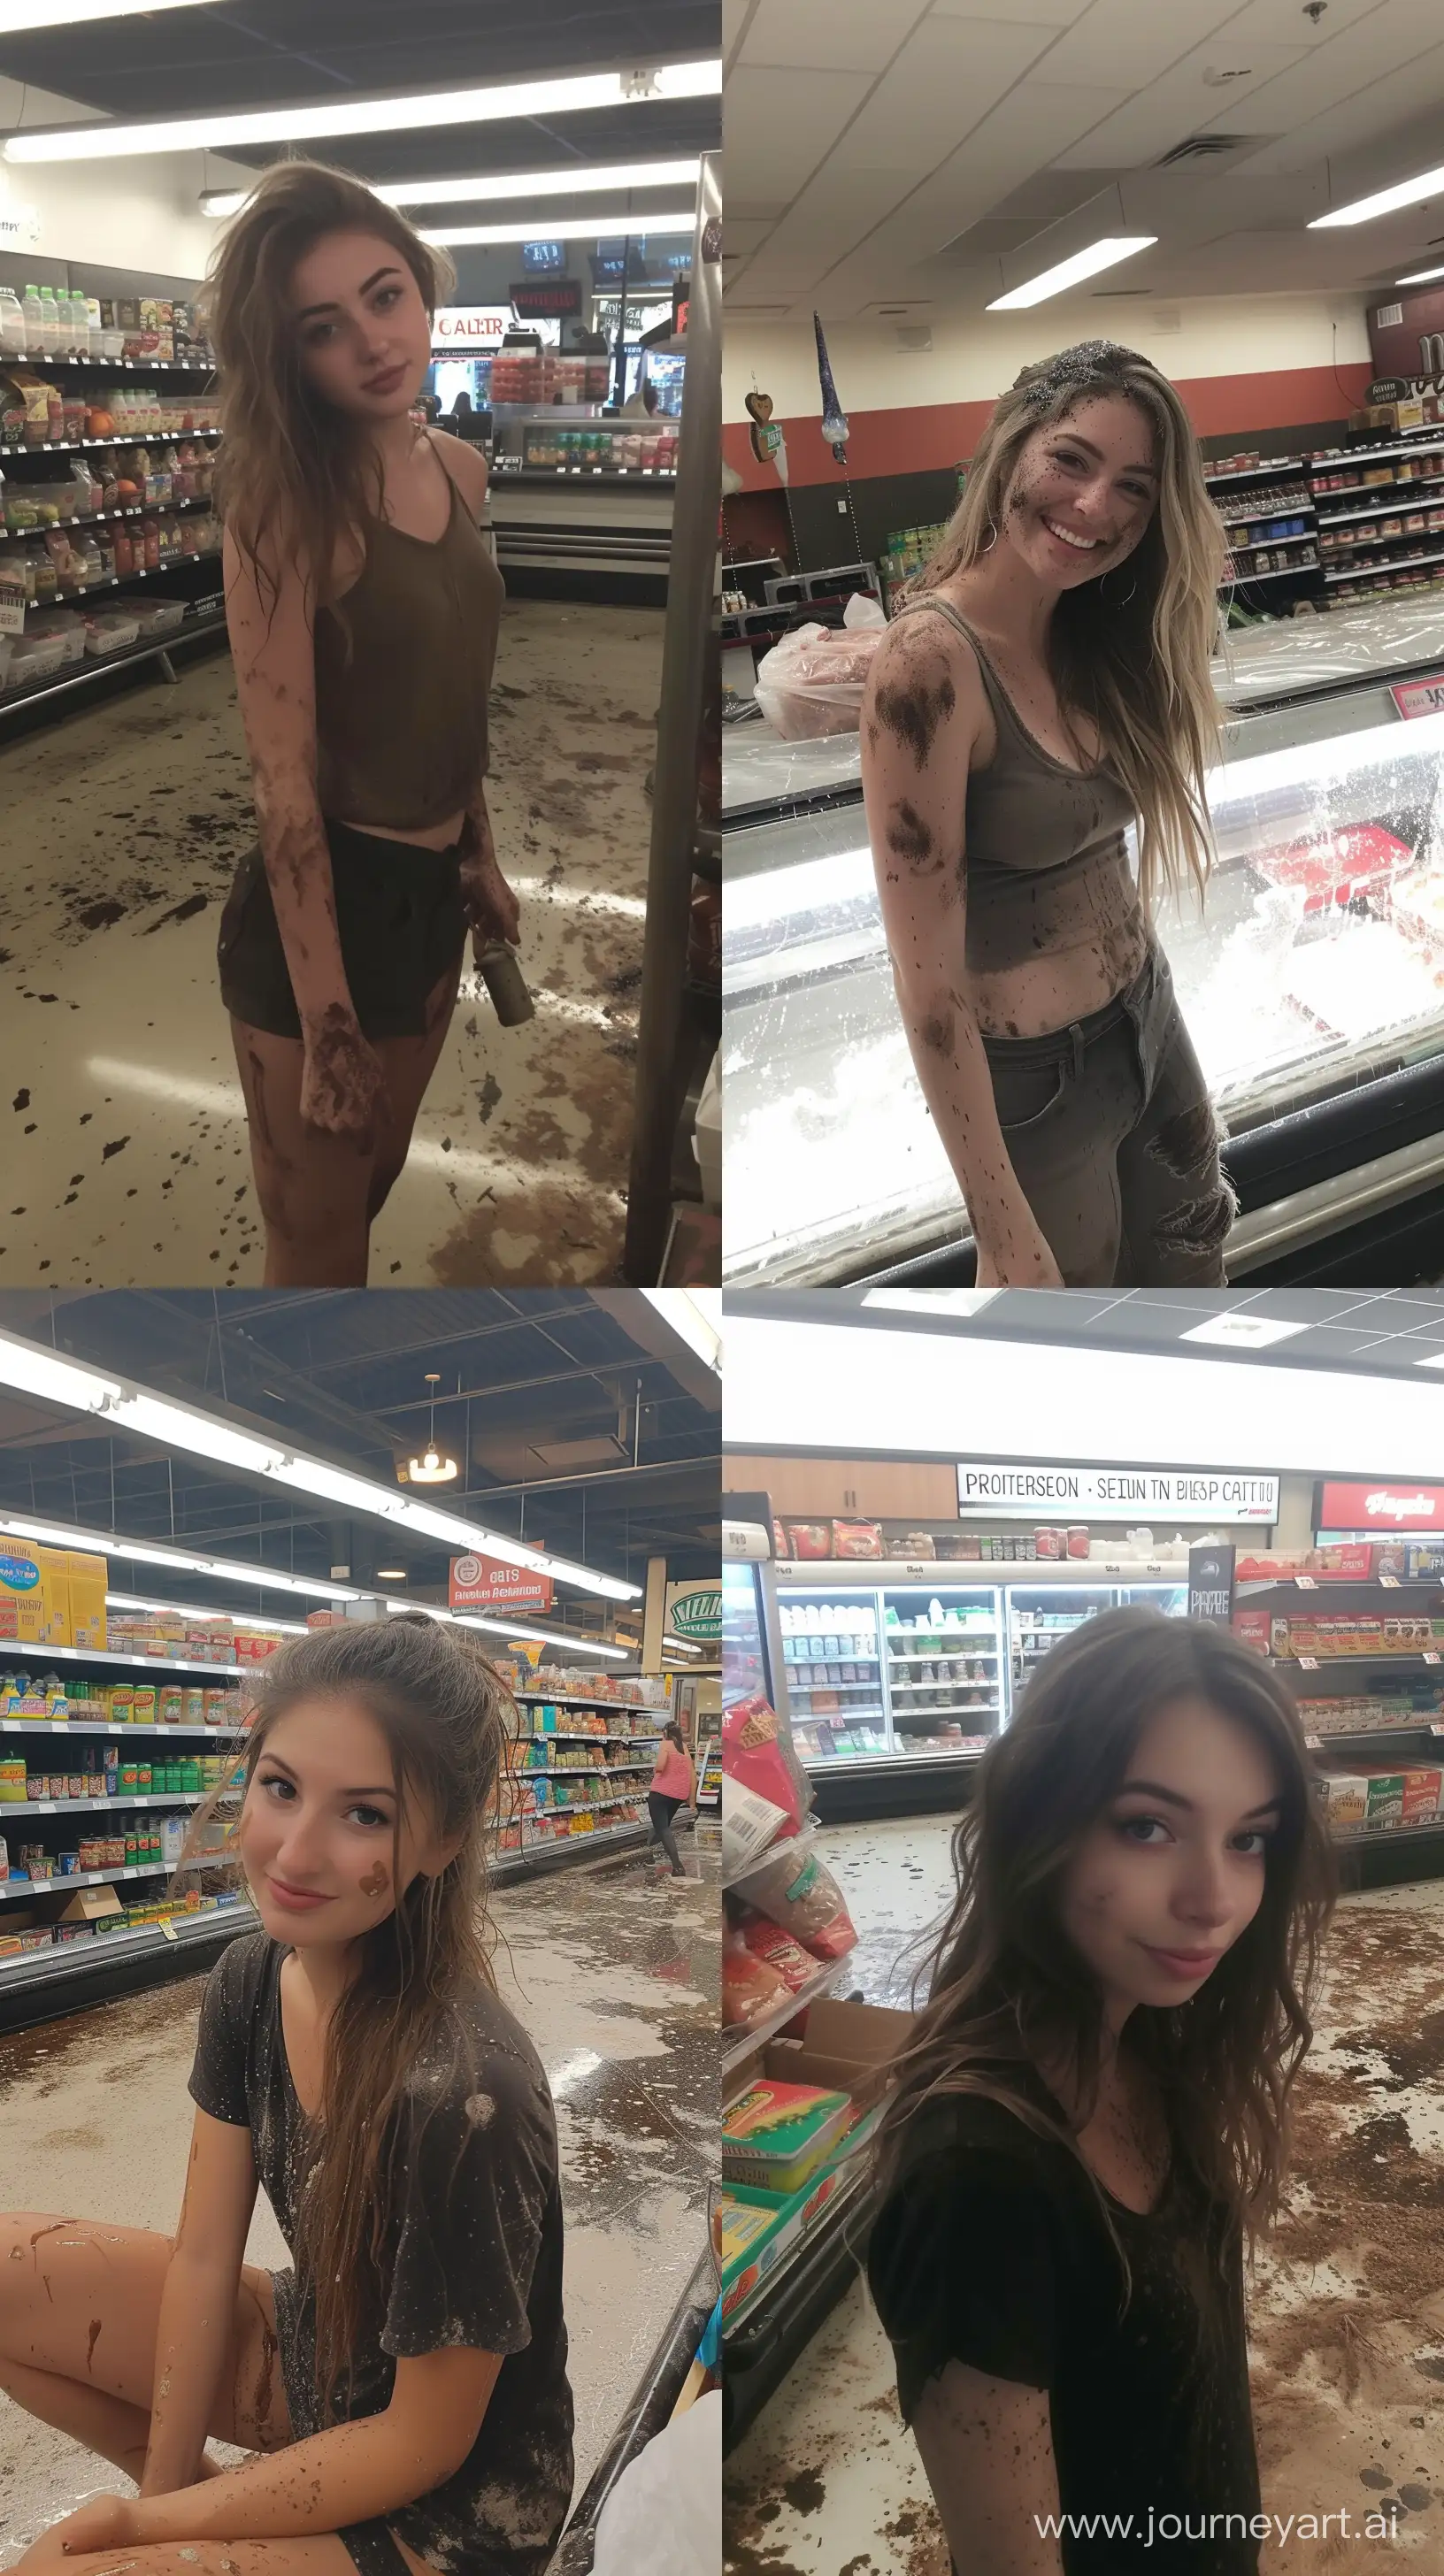 Urban-Grit-Stylish-Woman-Captured-in-Raw-Grocery-Store-Moment